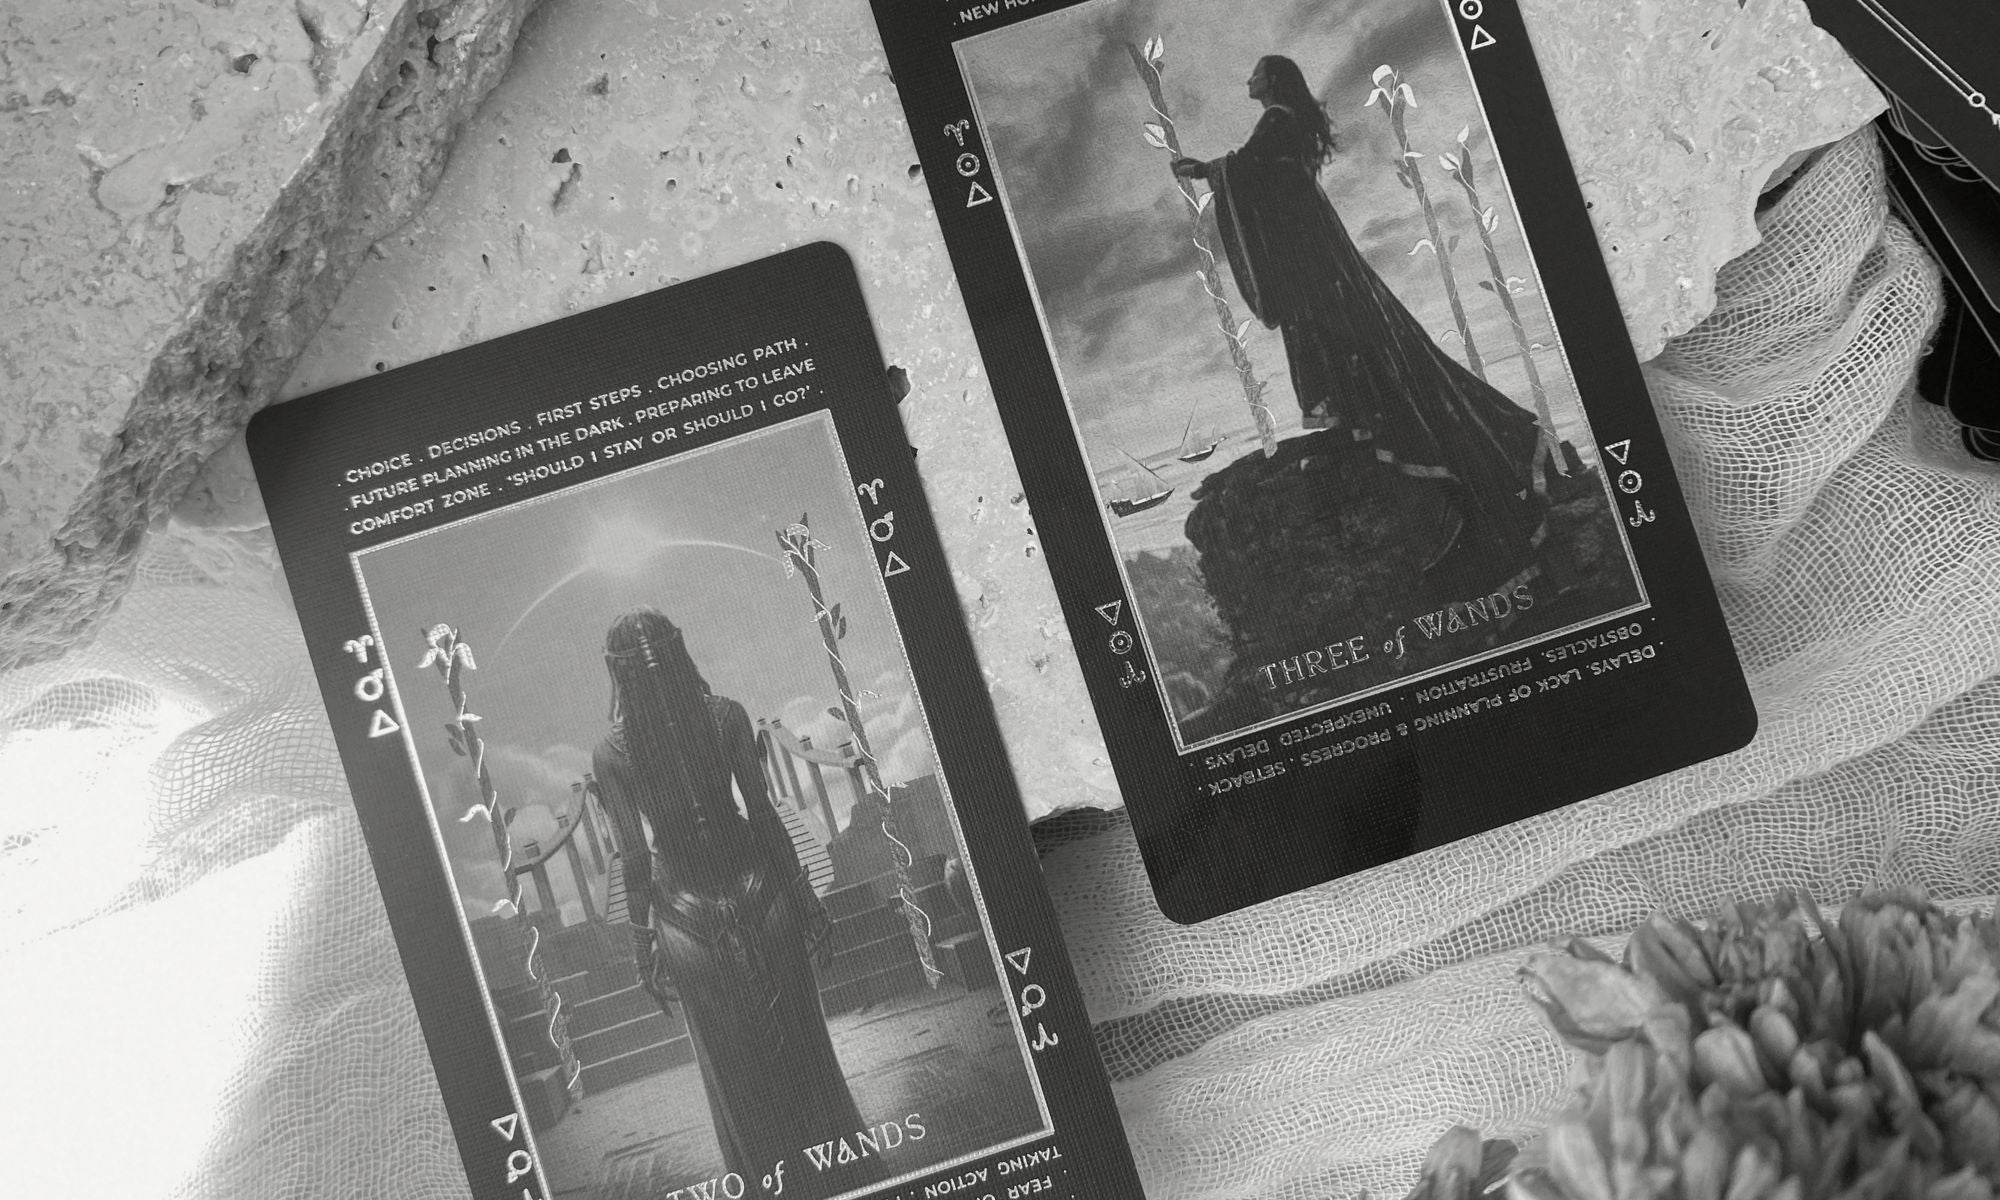 2 and 3 of Wands in Tarot